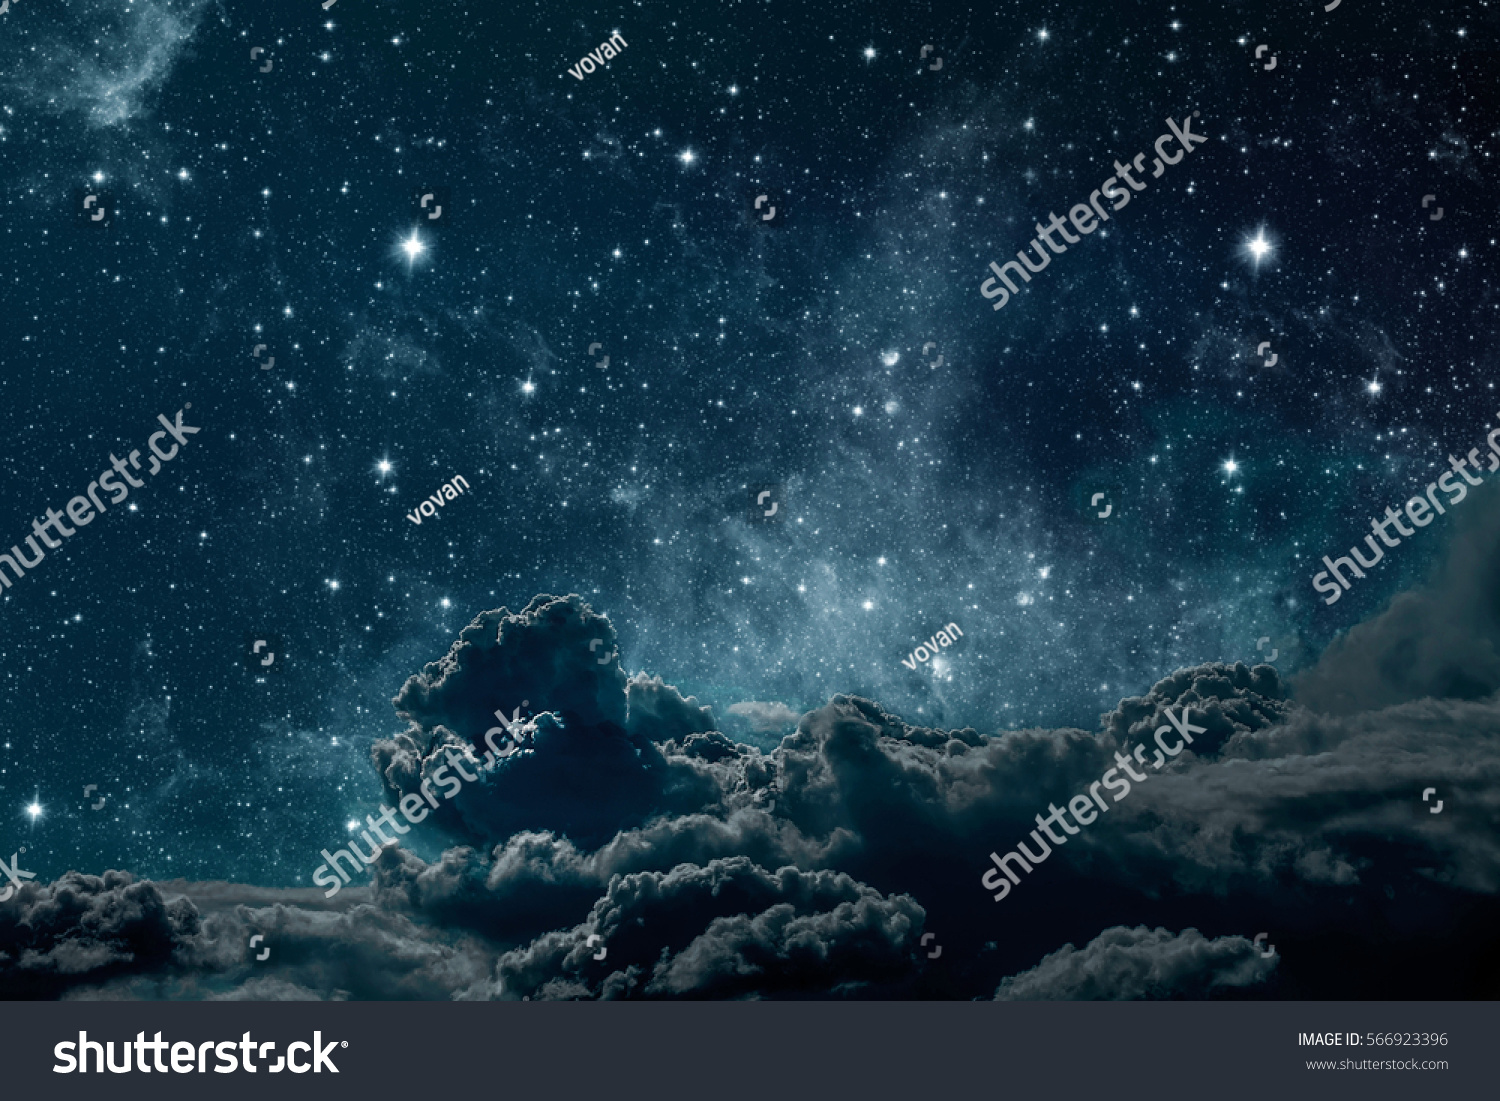 backgrounds night sky with stars and moon and clouds. wood. Elements of this image furnished by NASA #566923396